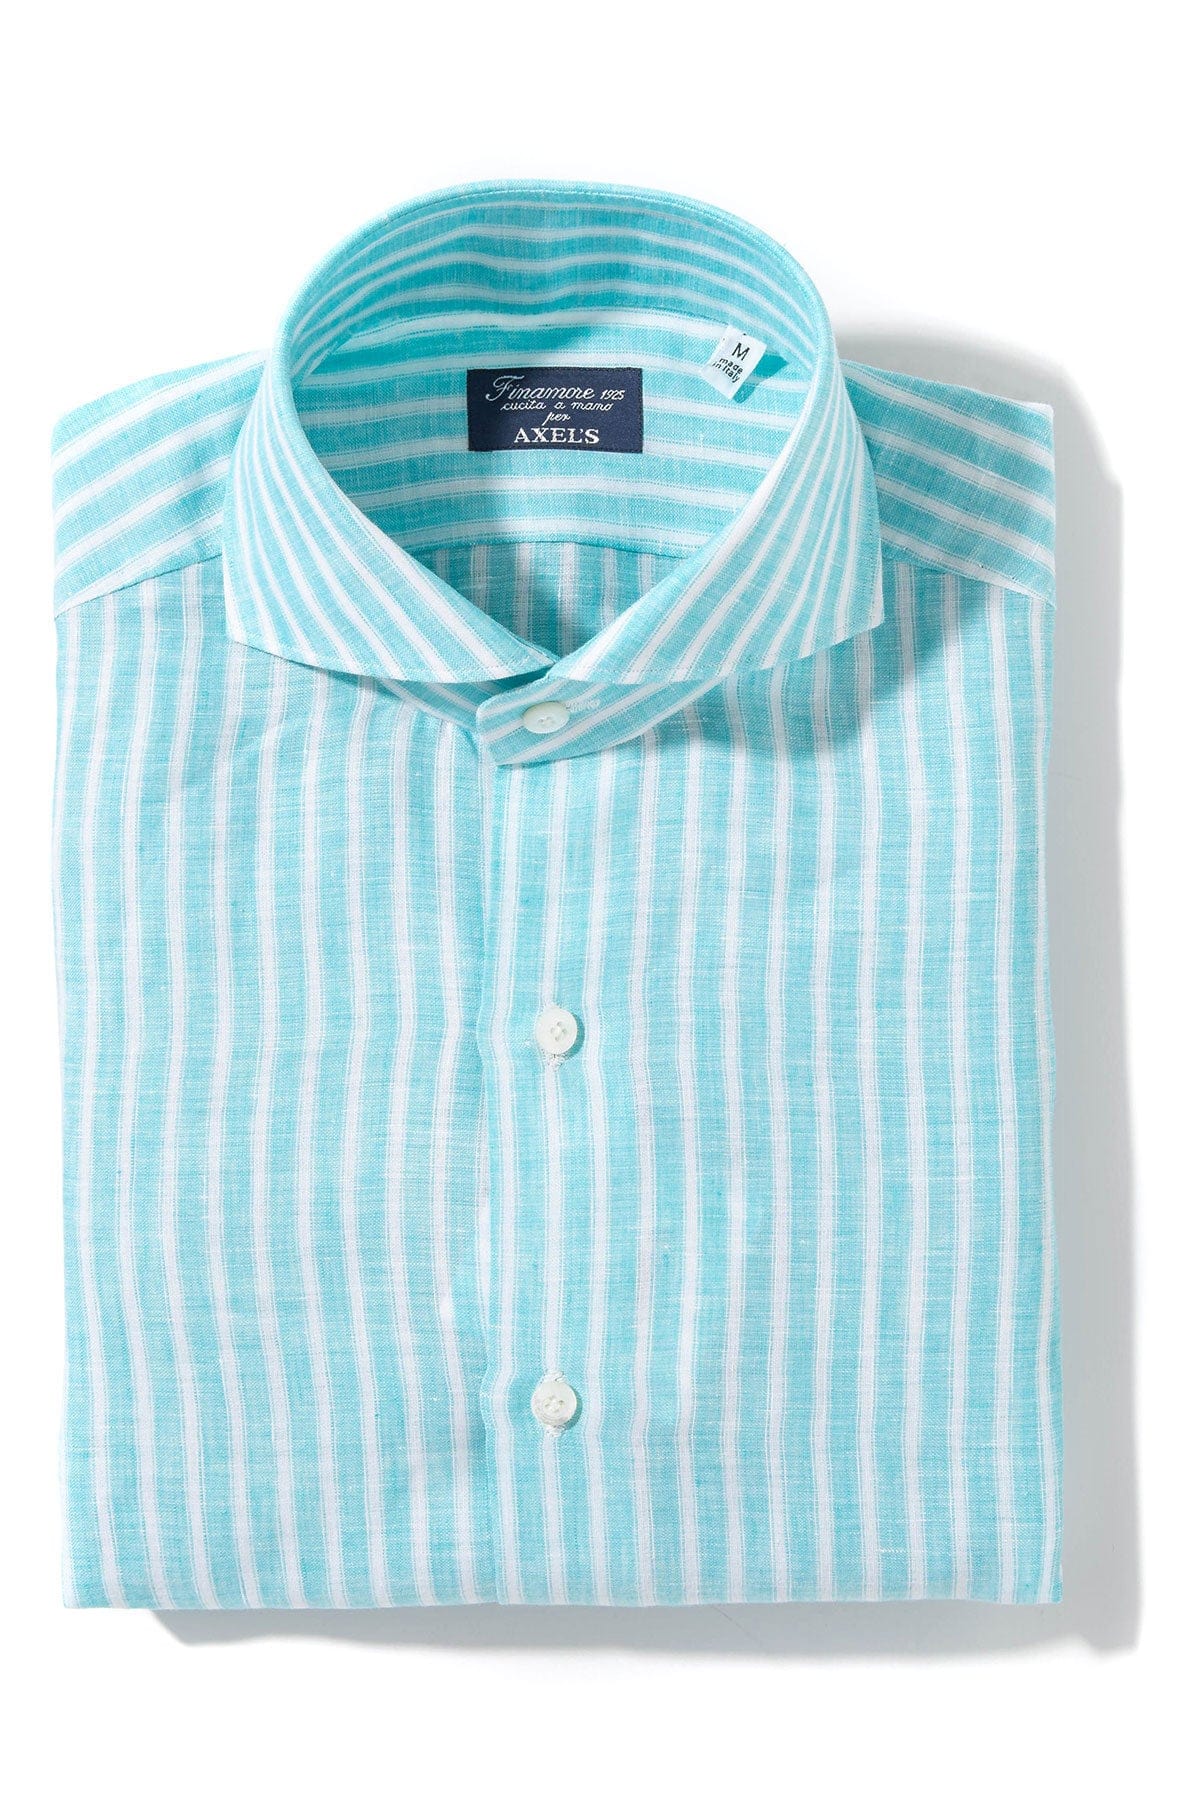 Bonobo Linen Washed Bengal Stripe In Turquoise - AXEL'S